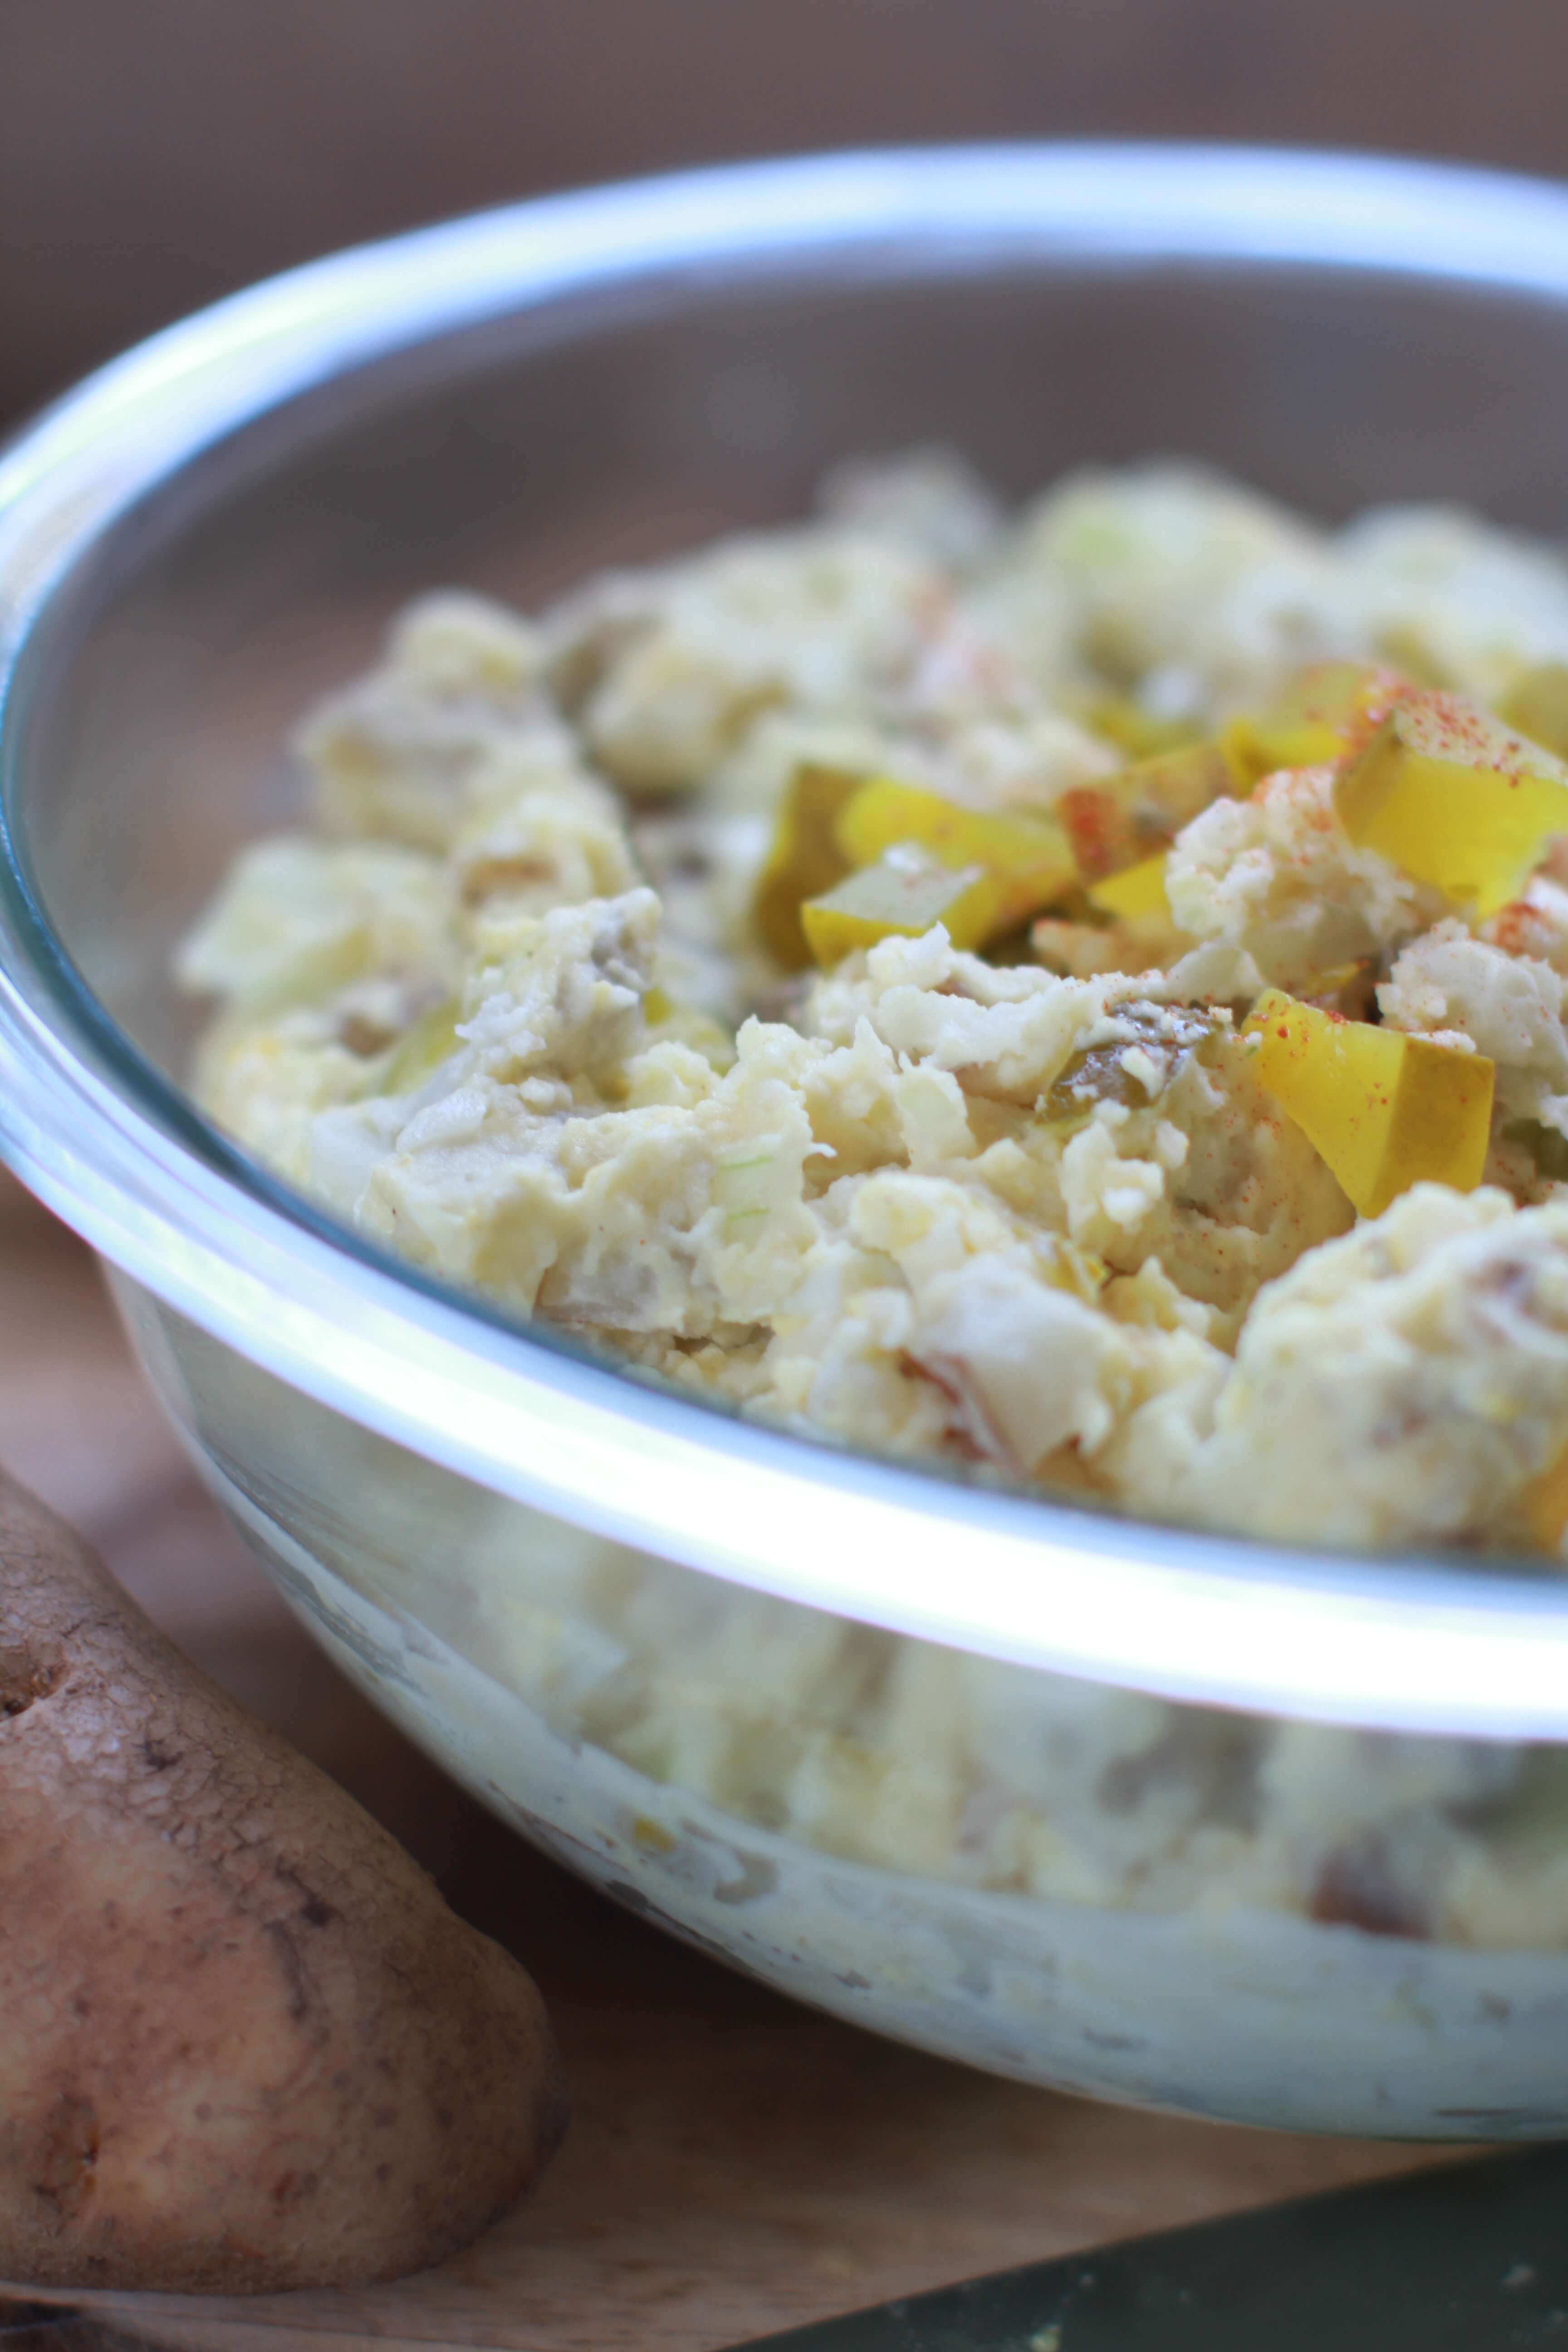 Dill pickle potato salad is a new take on a picnic time classic